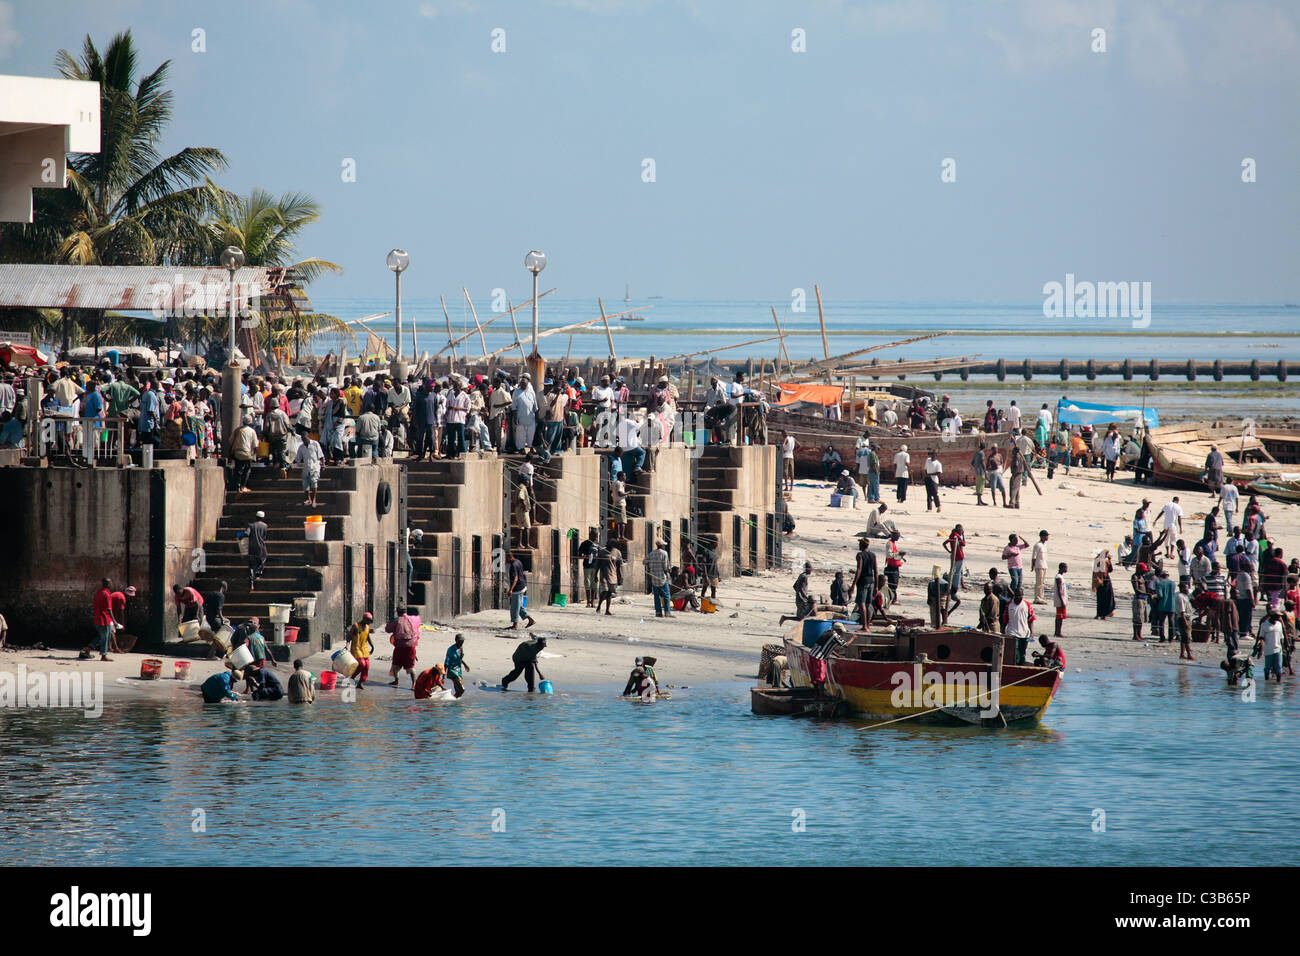 Crowds waiting for local ferries in Dar Es Salaam. Stock Photo